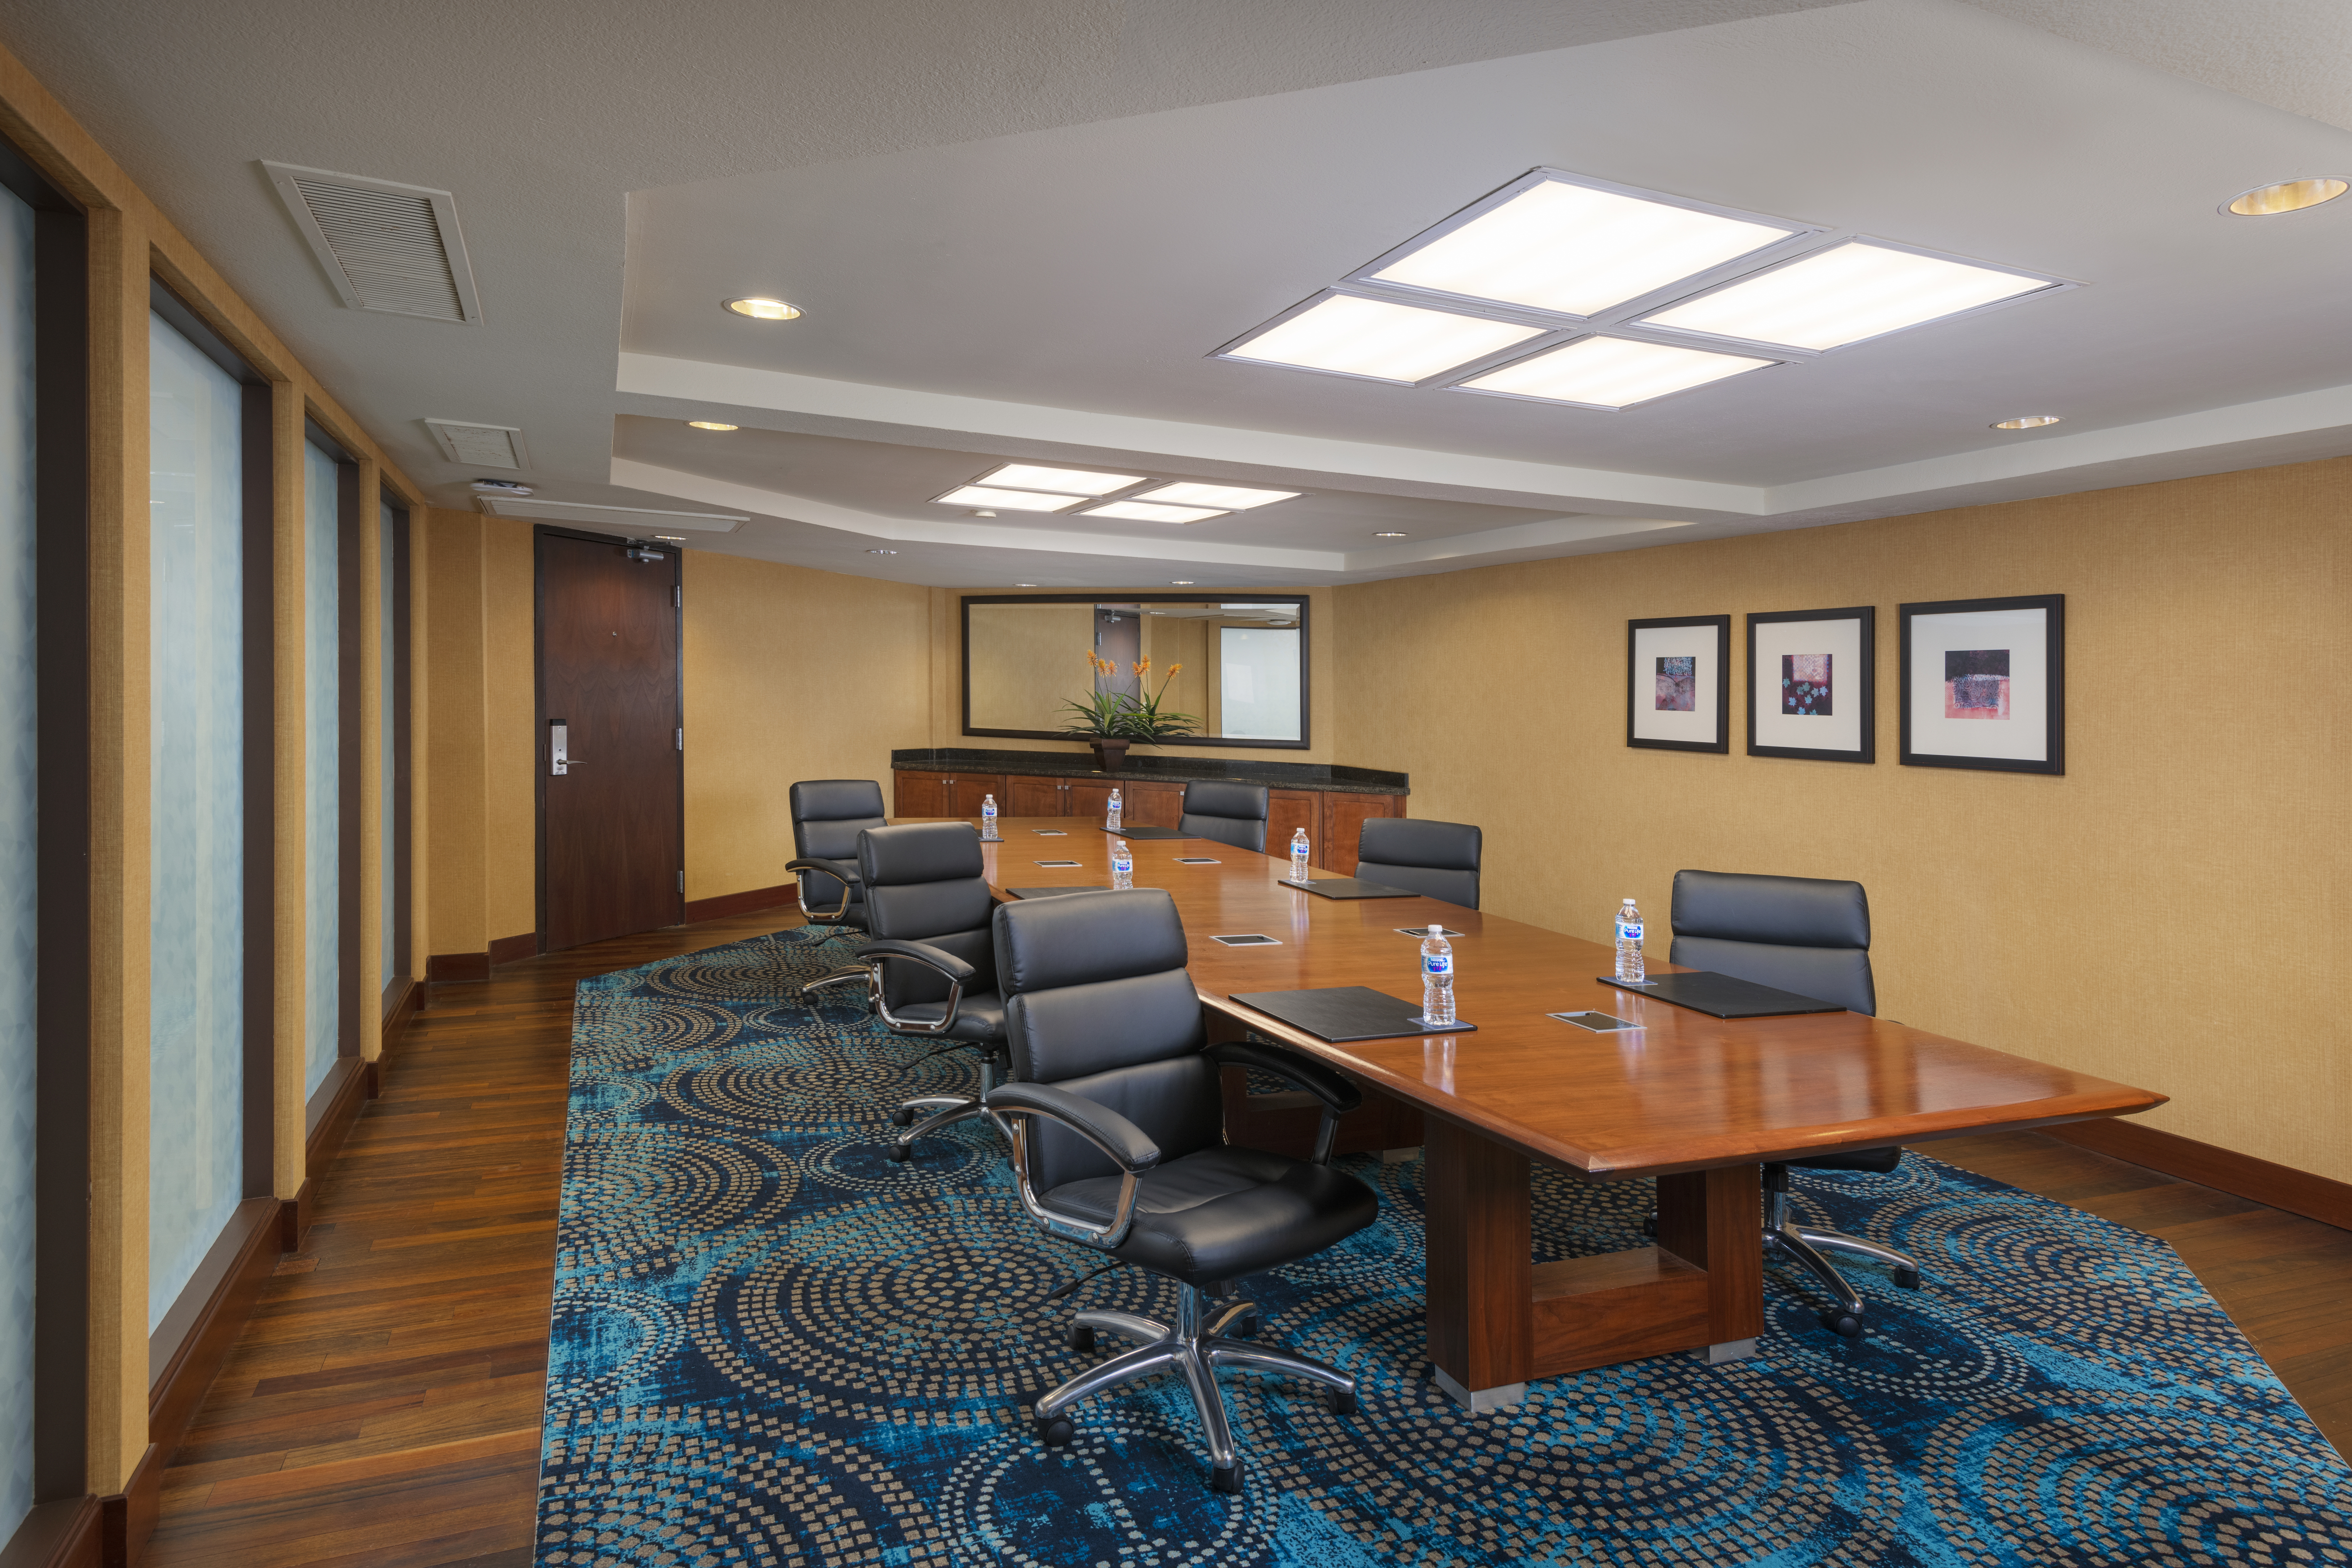 Boardroom Setup with Social Distance for Safety